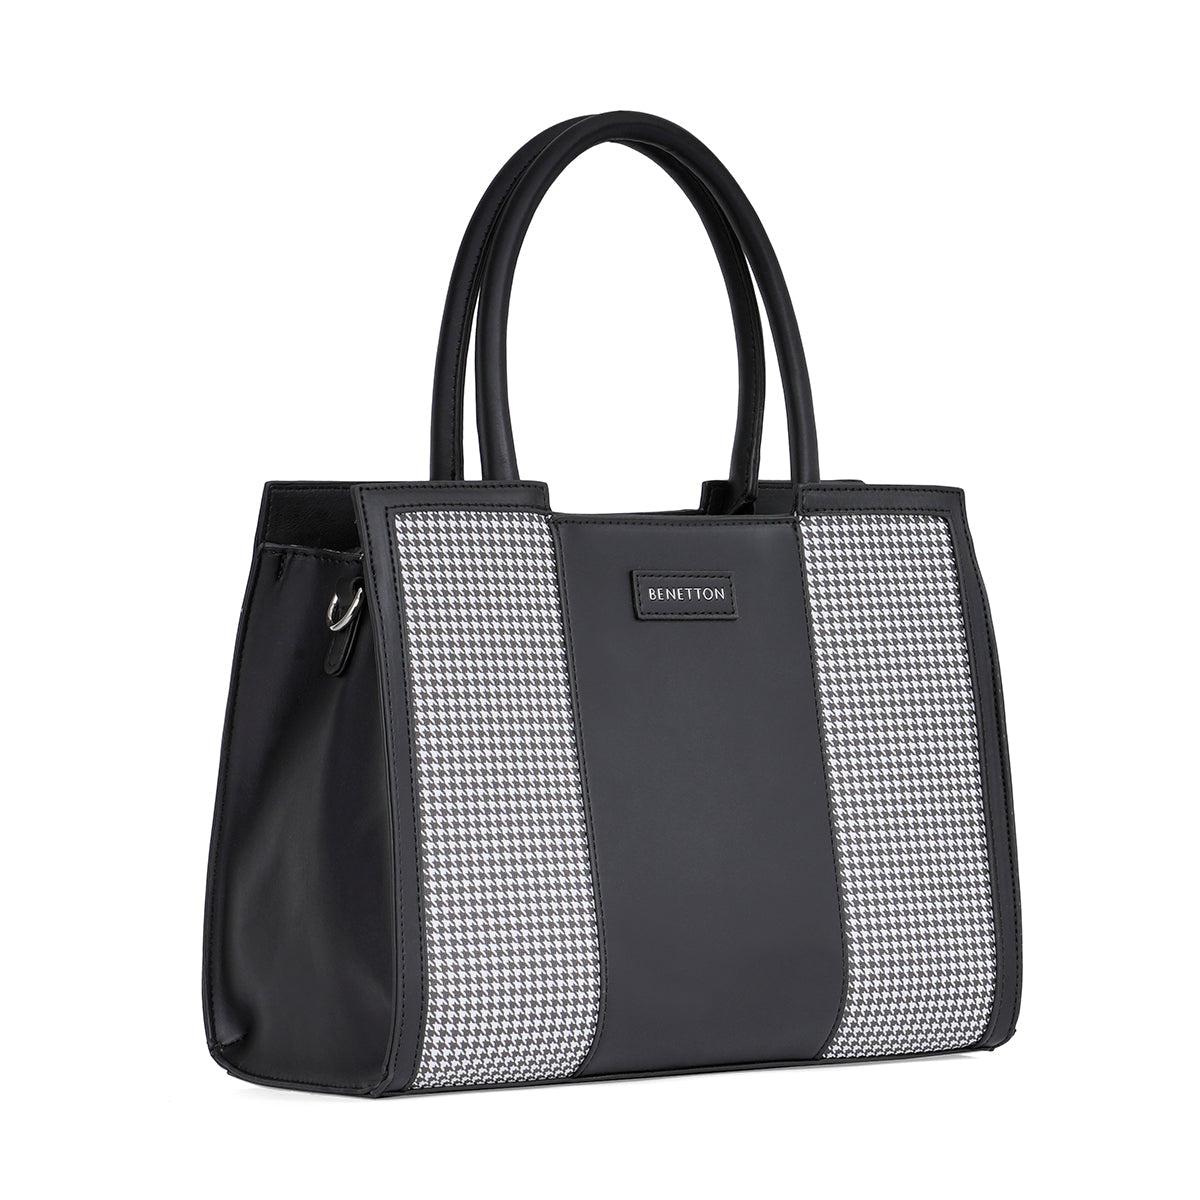 United Colors of Benetton Sayge Tote black